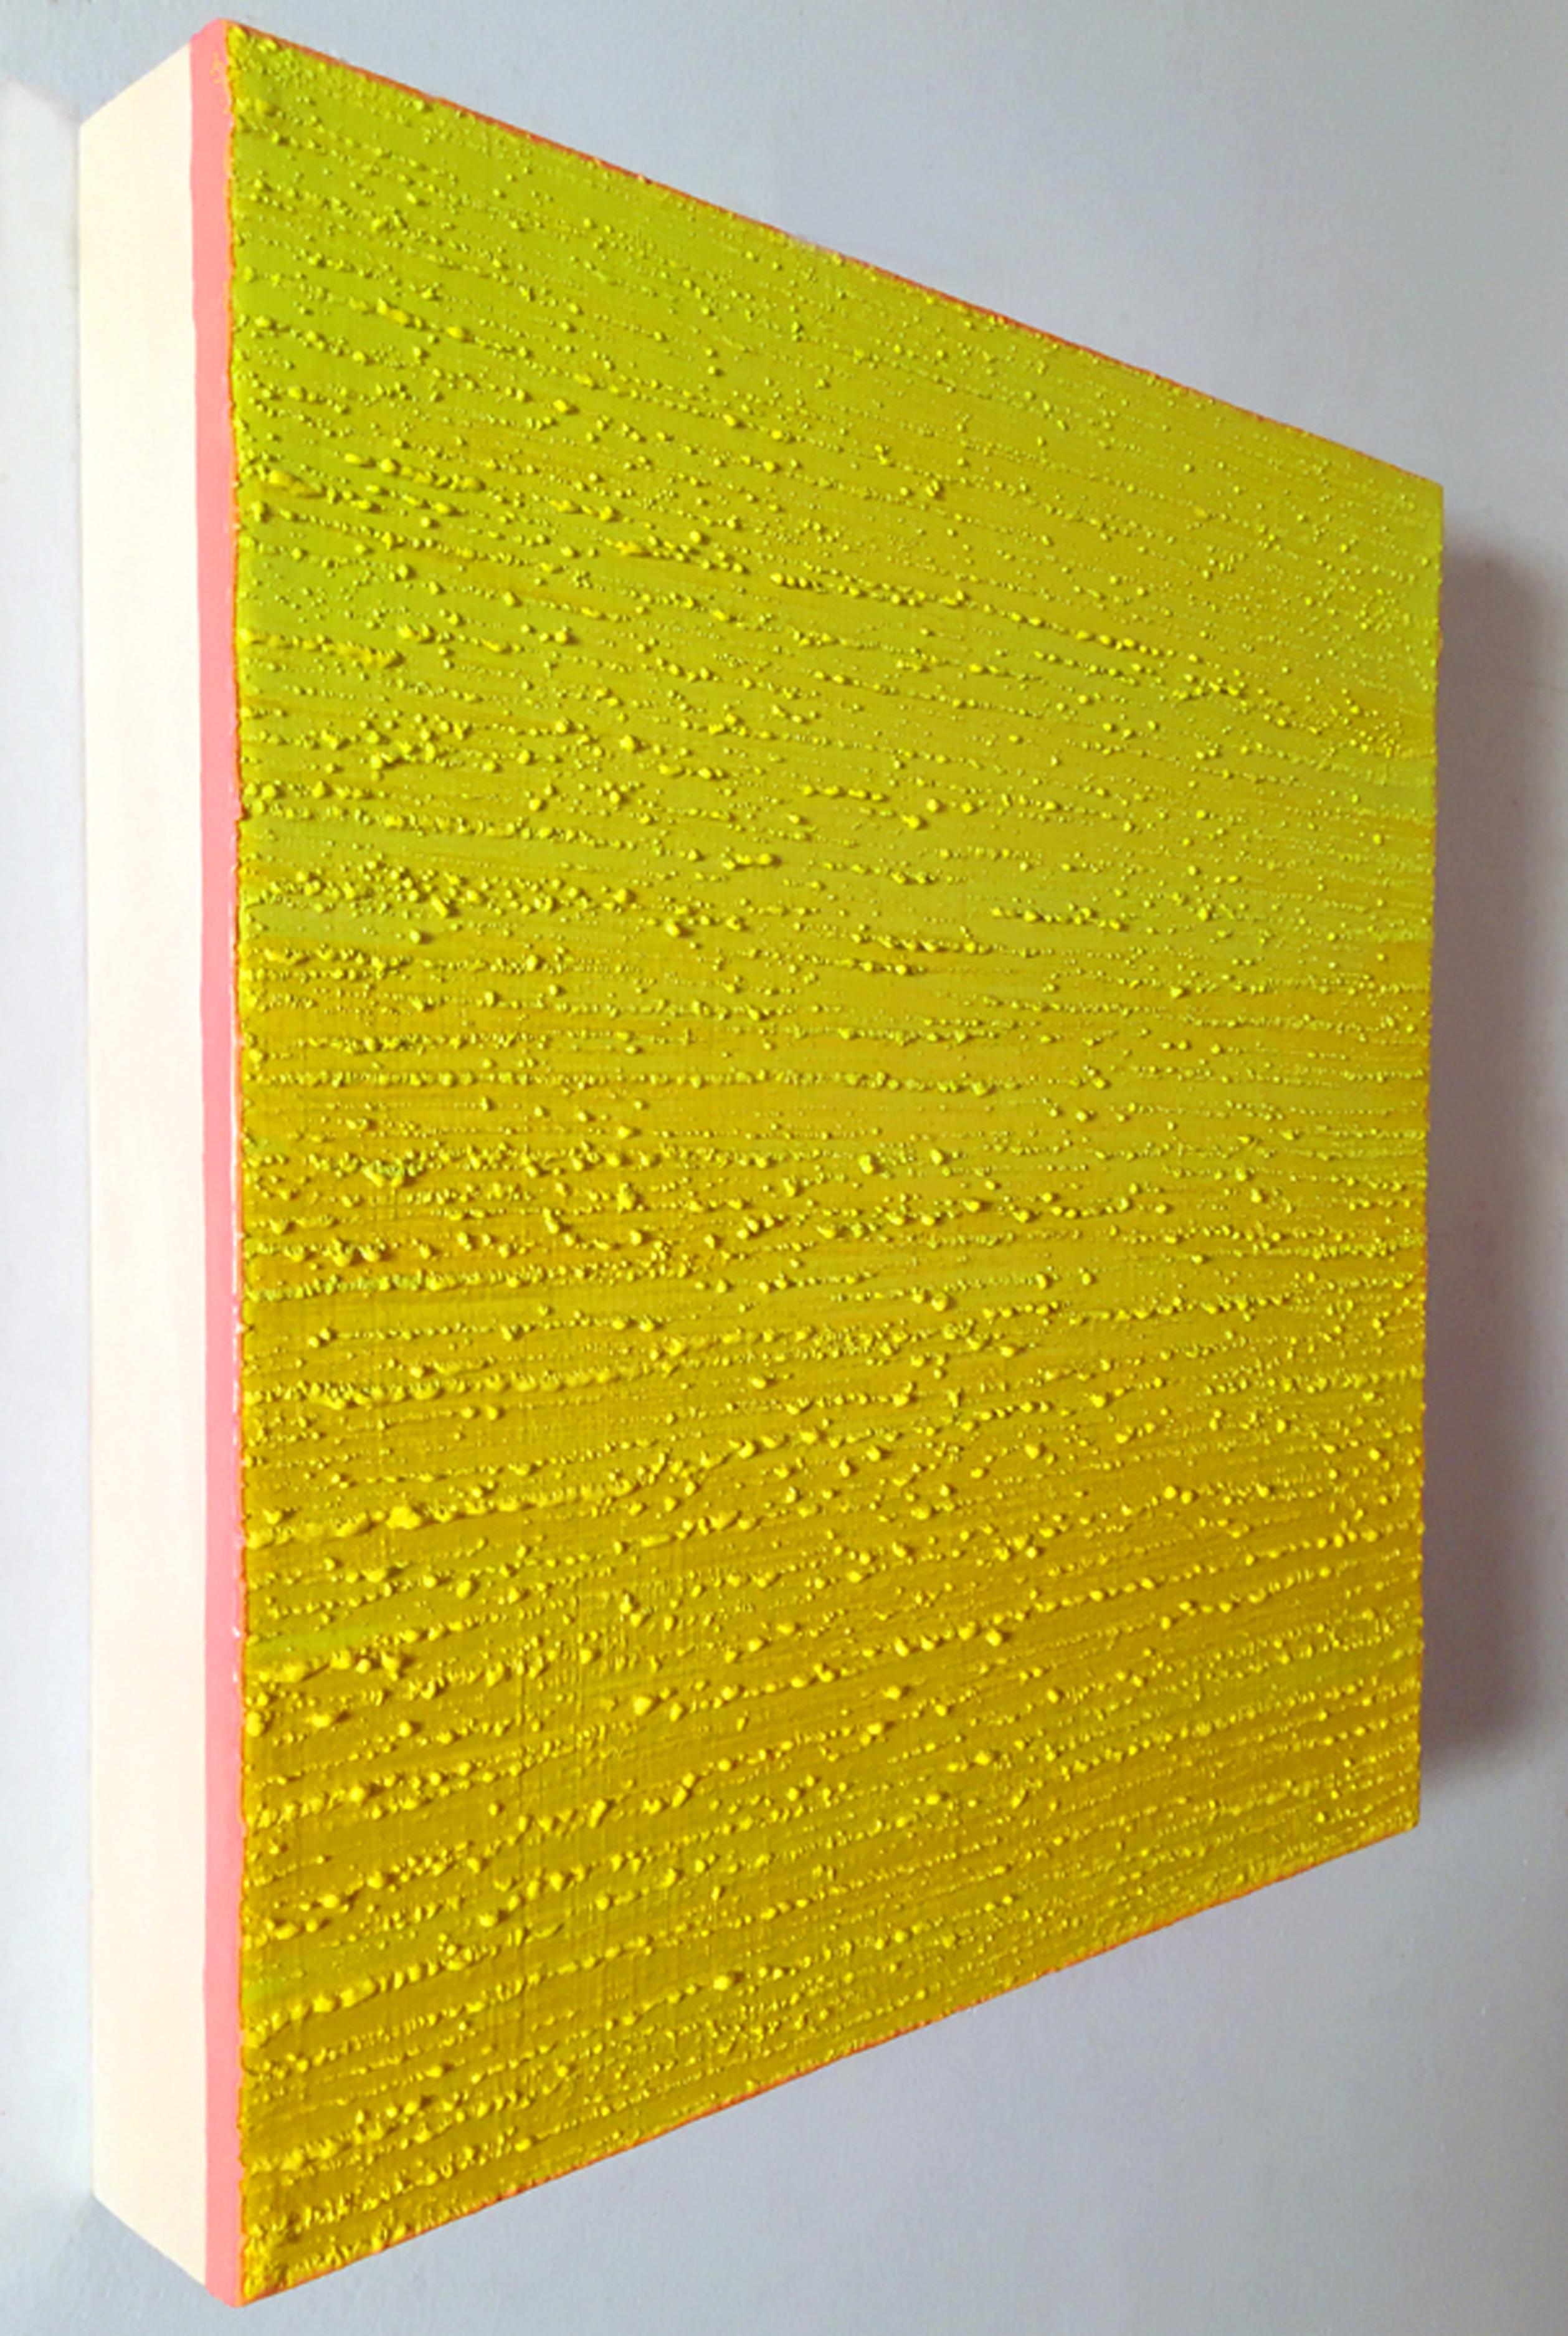 Silk Road 444, 2019, encaustic on panel, 12 x 12 x 2 inches 2